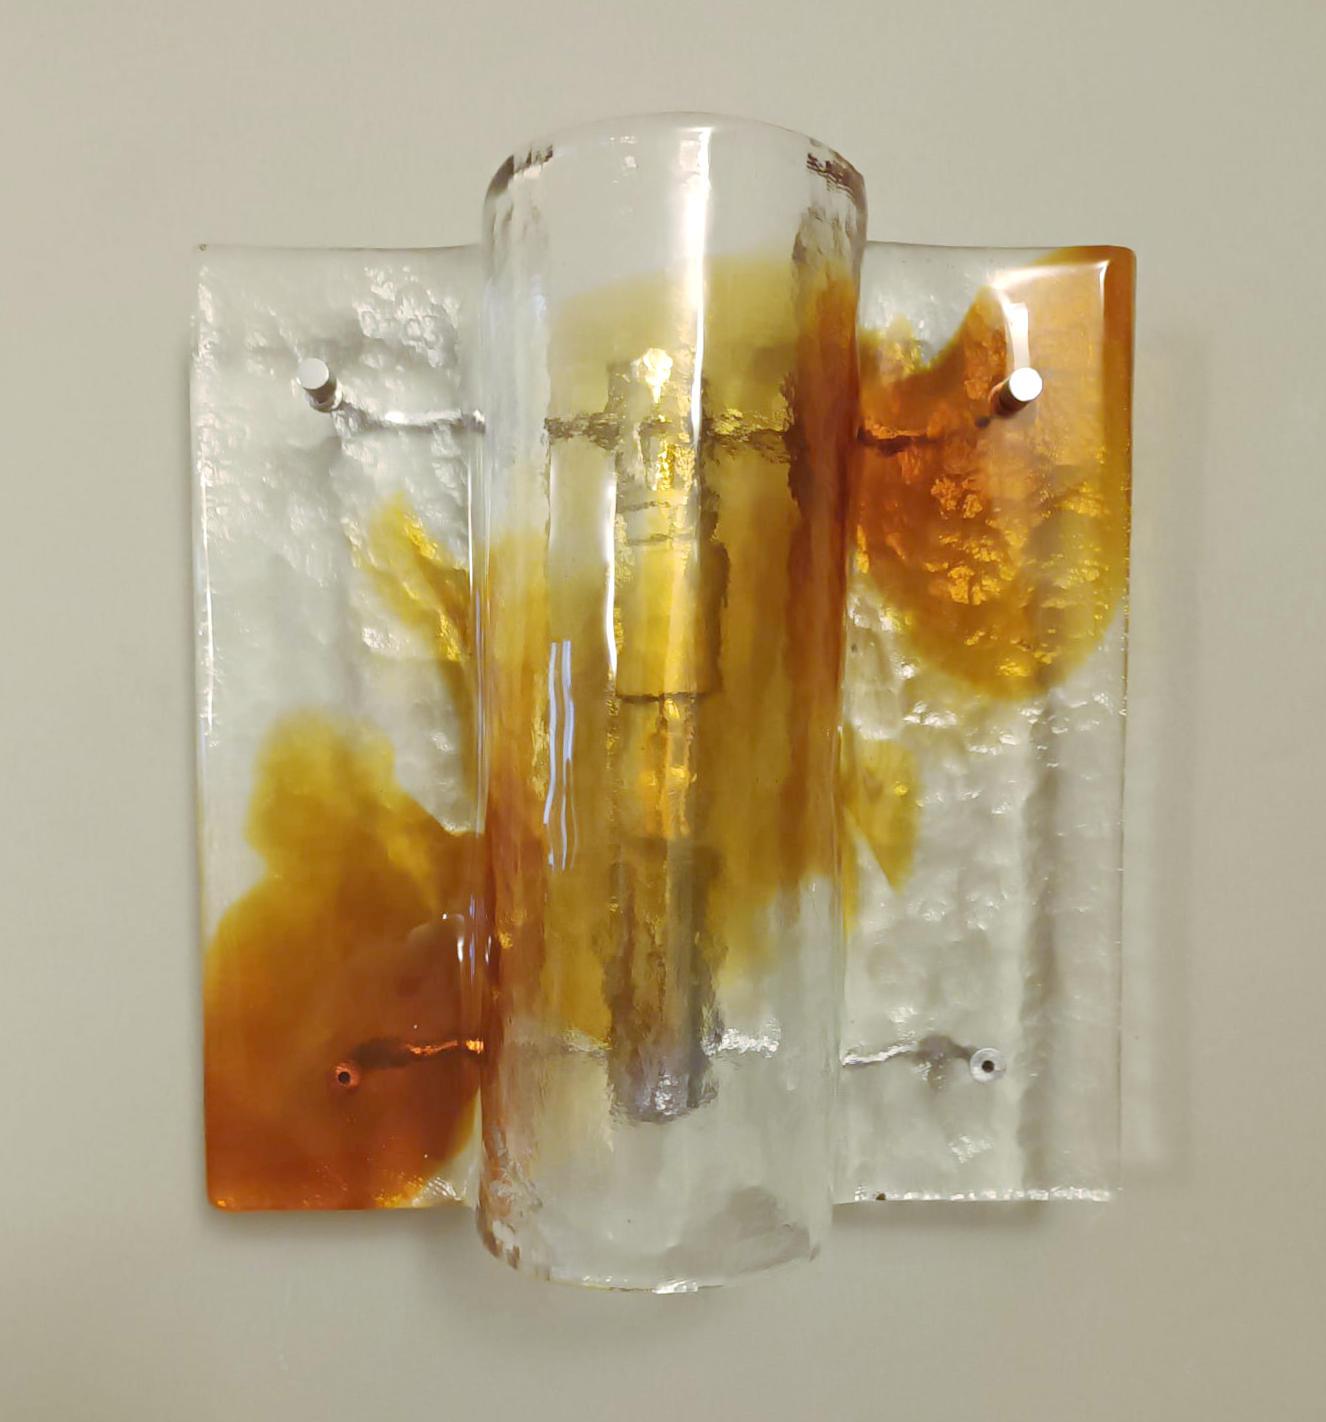 Italian wall lights with clear and amber Murano glass shades mounted on chrome brackets / Made in Italy by Mazzega, circa 1960s
1 light / E12 or E14 type / max 40W
Measures: Height 12 inches, width 11.5 inches, depth 6 inches
3 available in stock